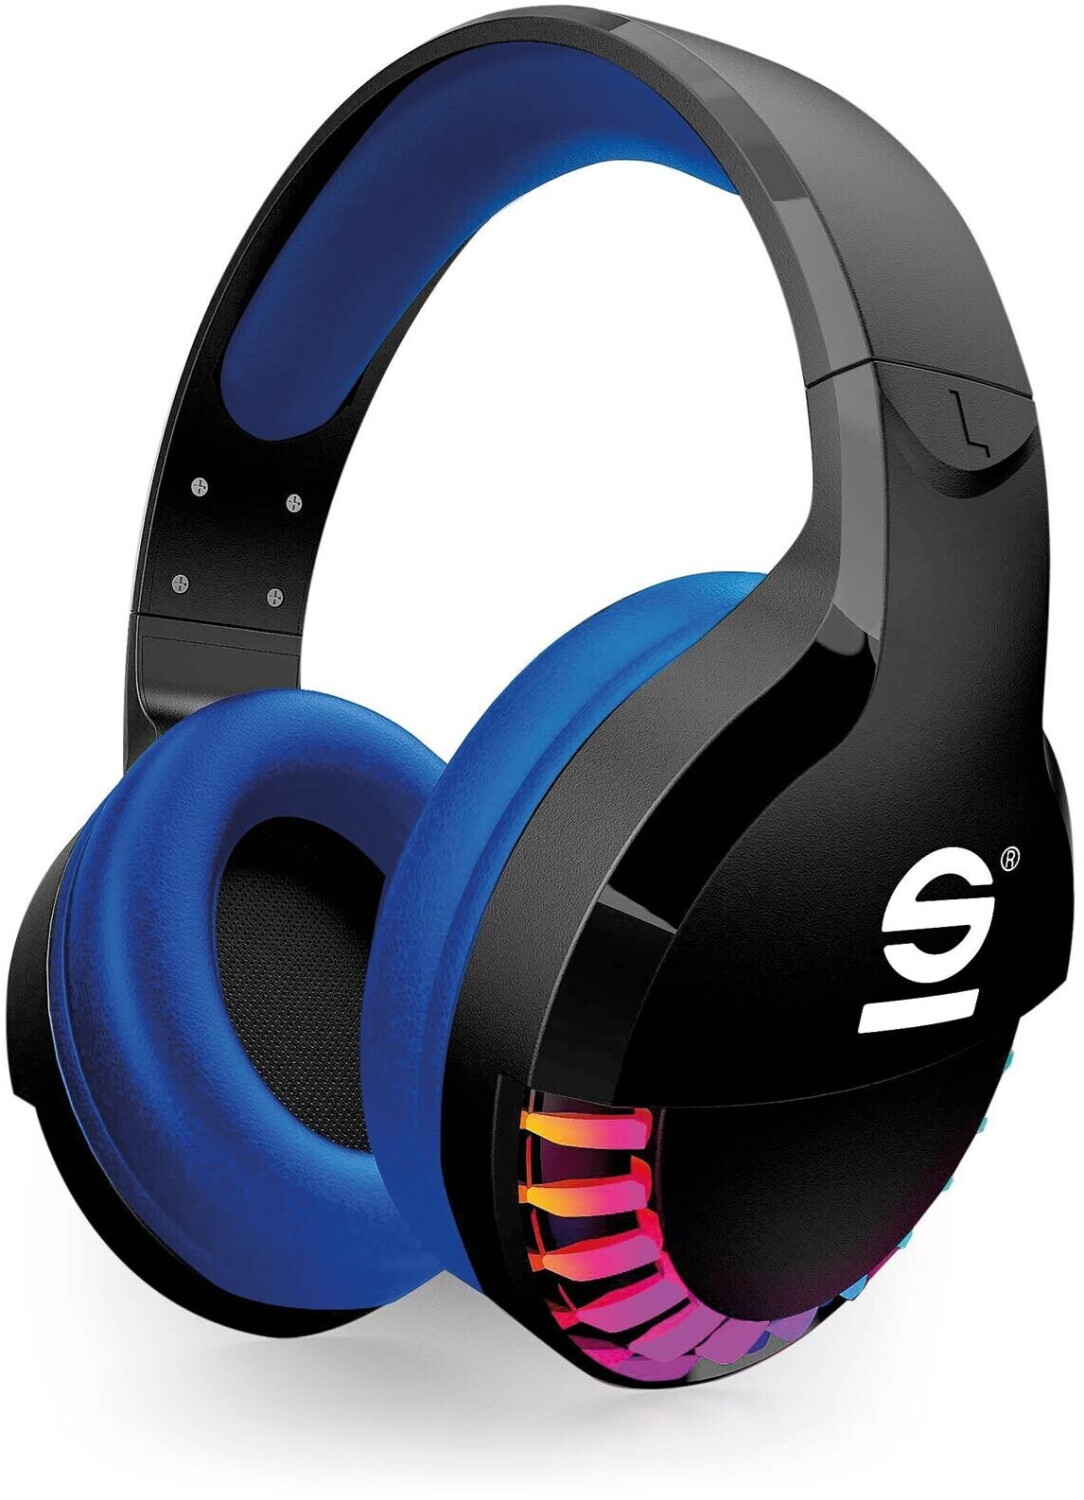 Celly SPEED [SPARCO COLLECTION] Cuffie Gaming wireless a € 34,49 (oggi)